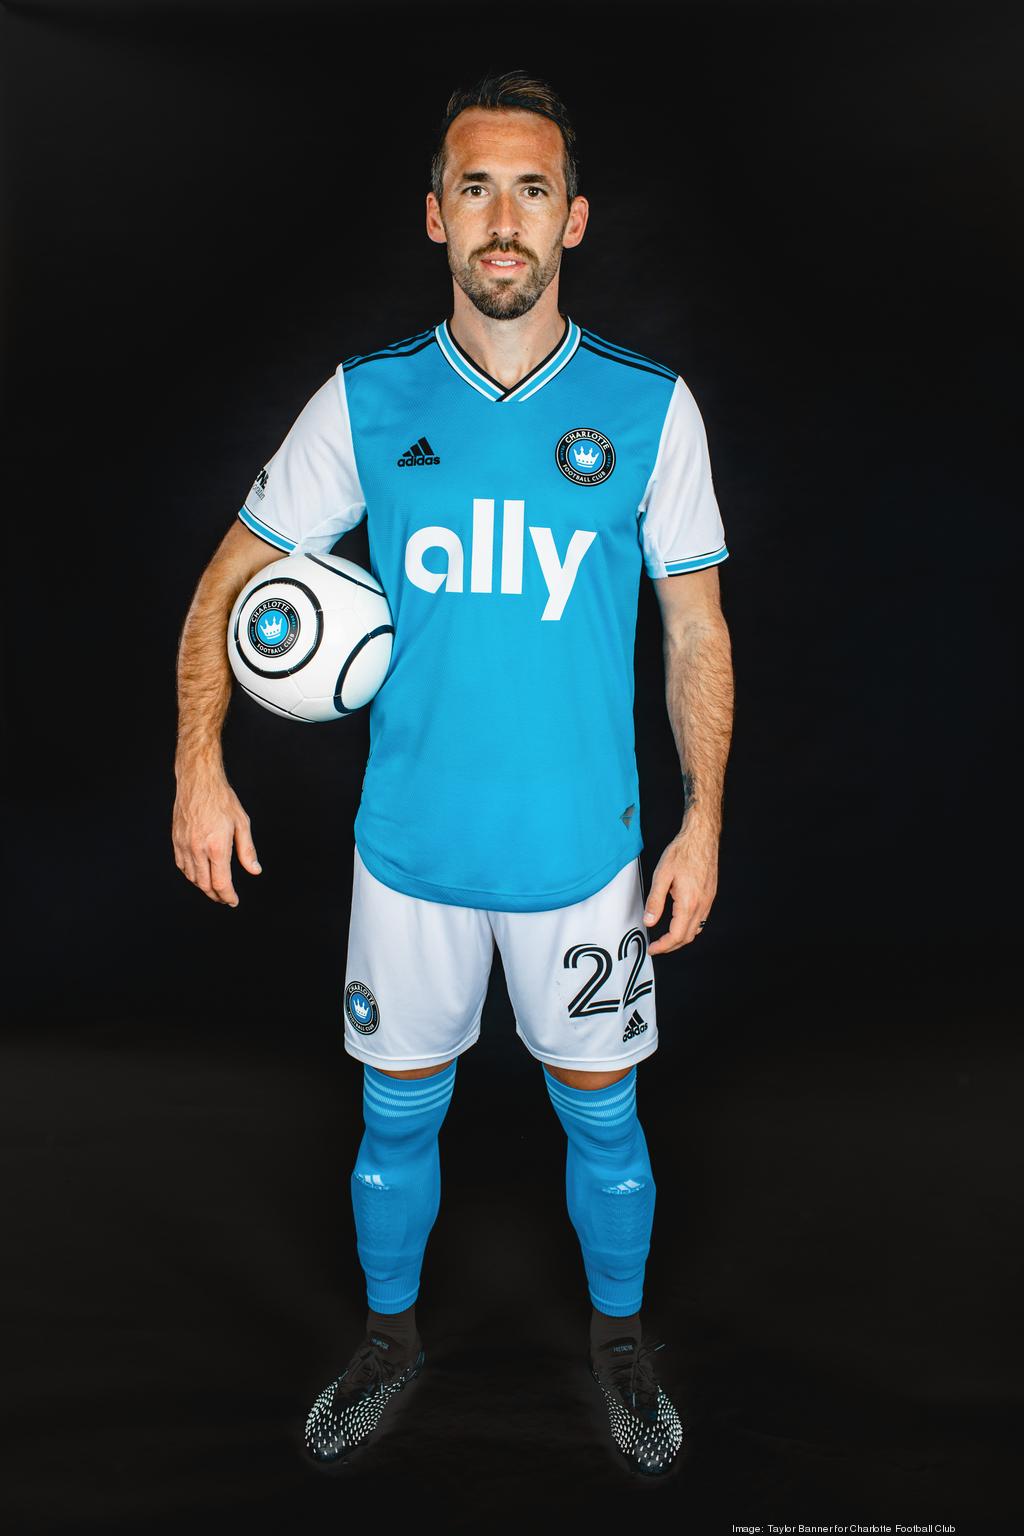 CSM Sport & Entertainment  Charlotte FC's first jersey reveal